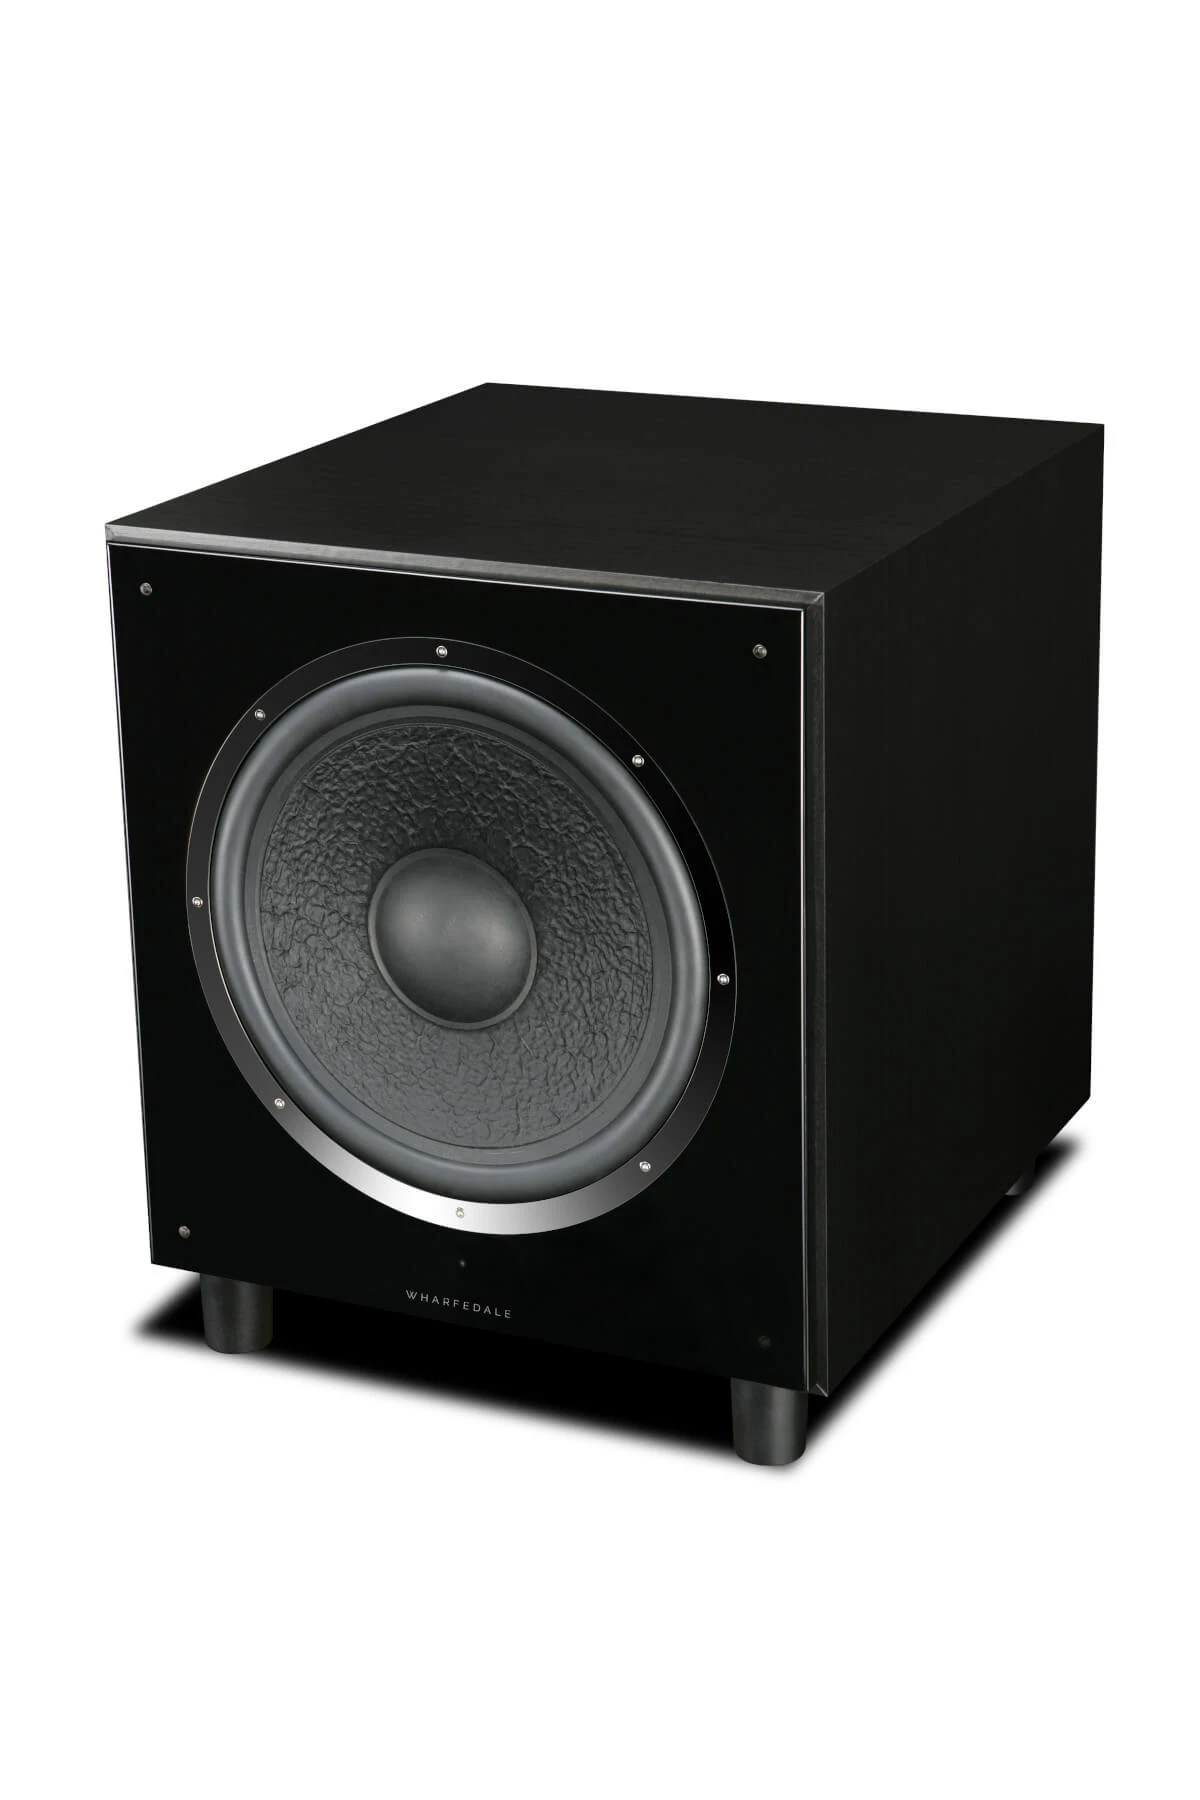 Wharfedale-SW-15-blackwood-front